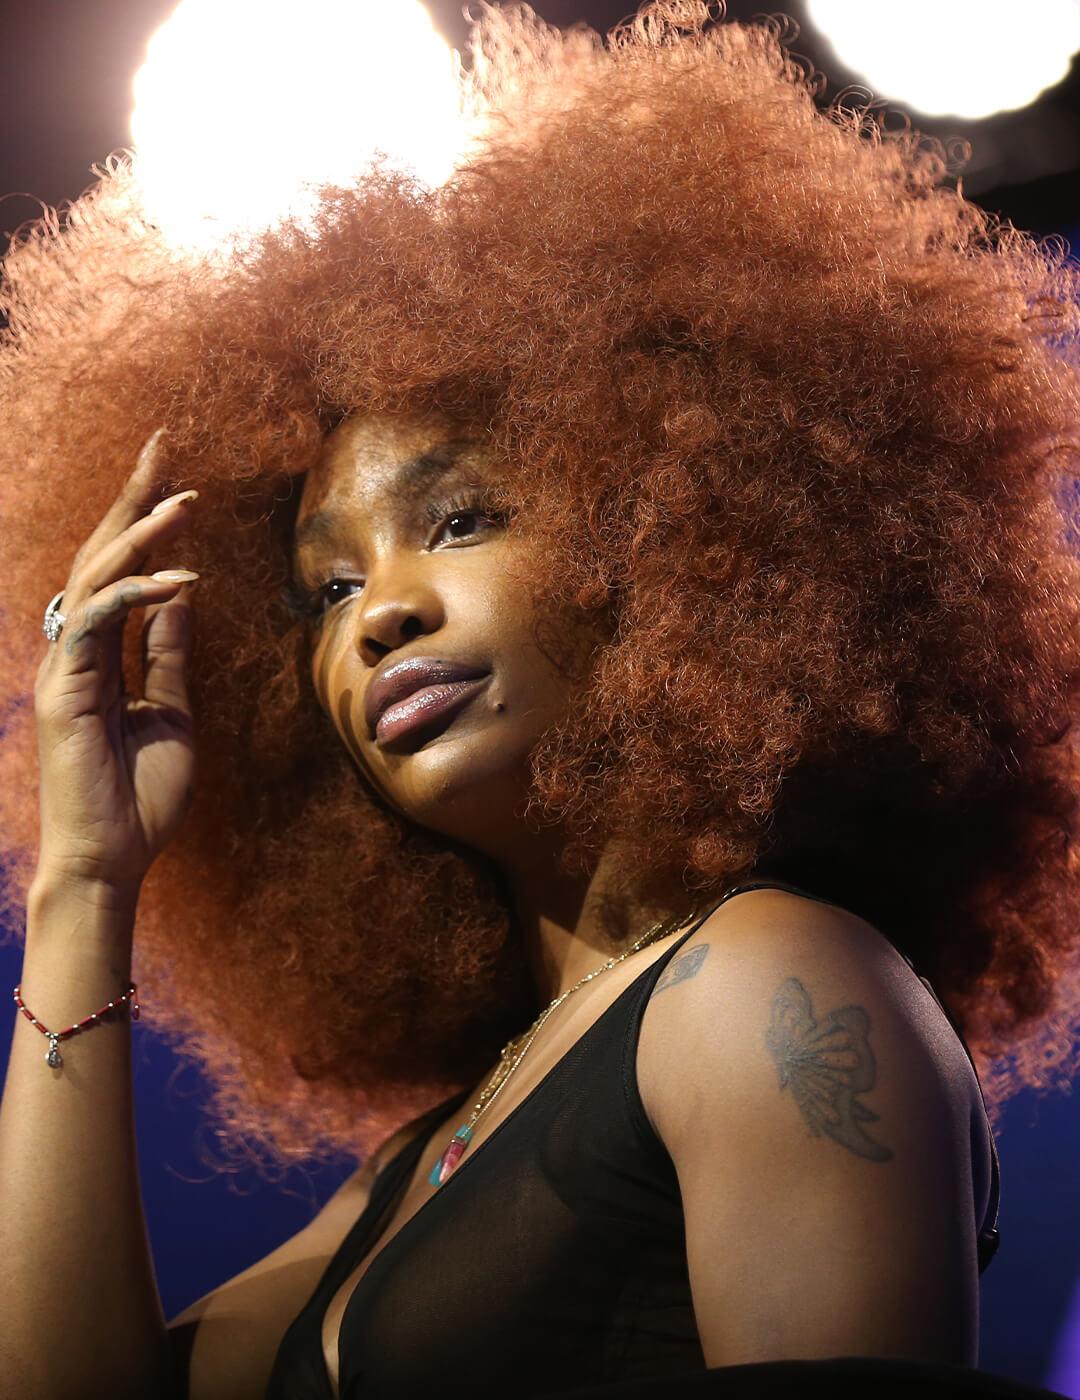 A photo of SZA with a mocha copper afro hair and wearing a black dress